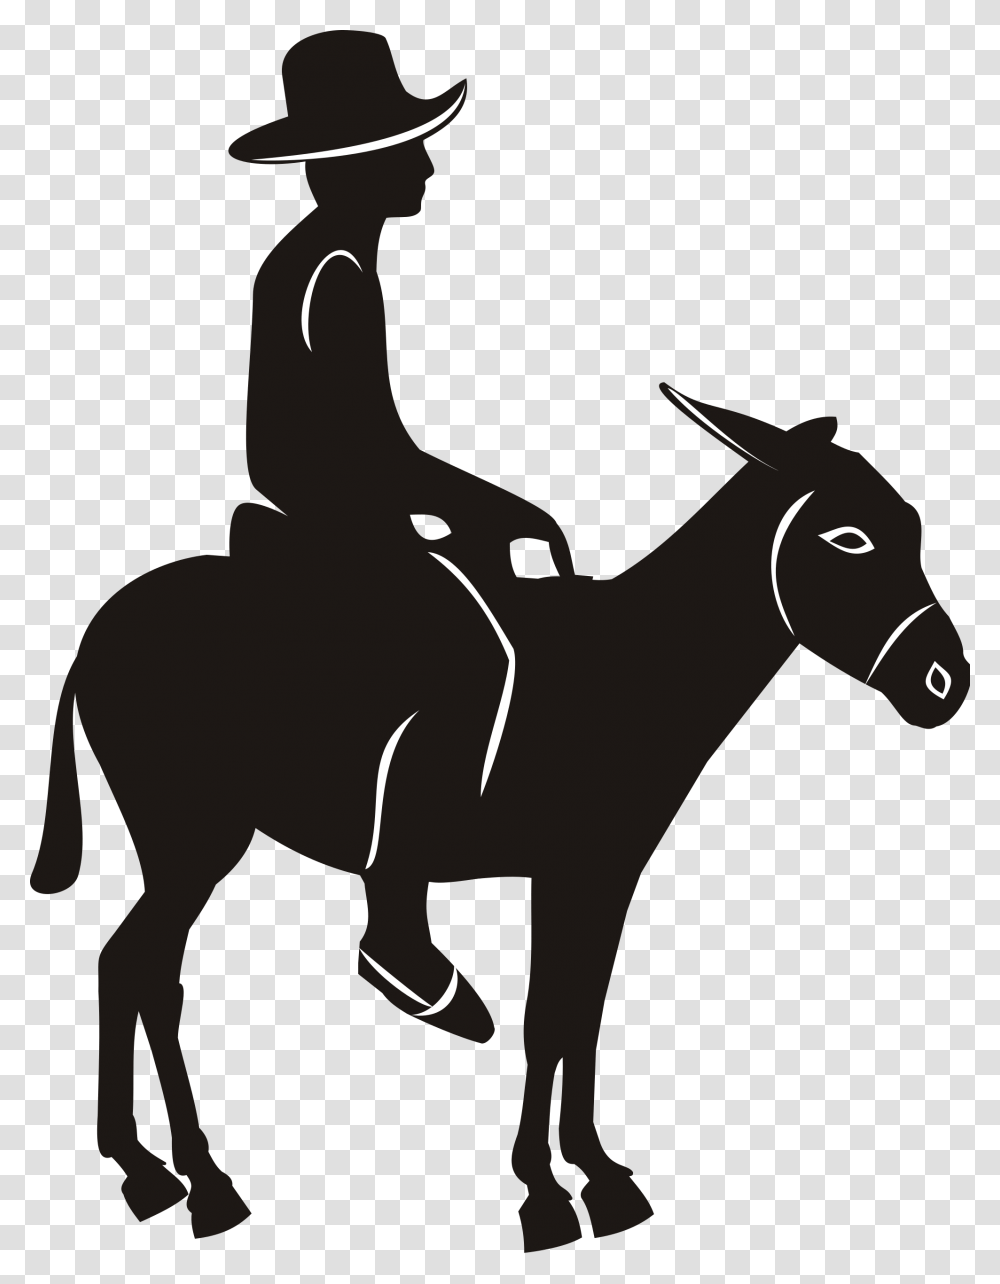 Donkey Silhouette Man On Donkey Silhouette, Mammal, Animal, Horse Transparent Png